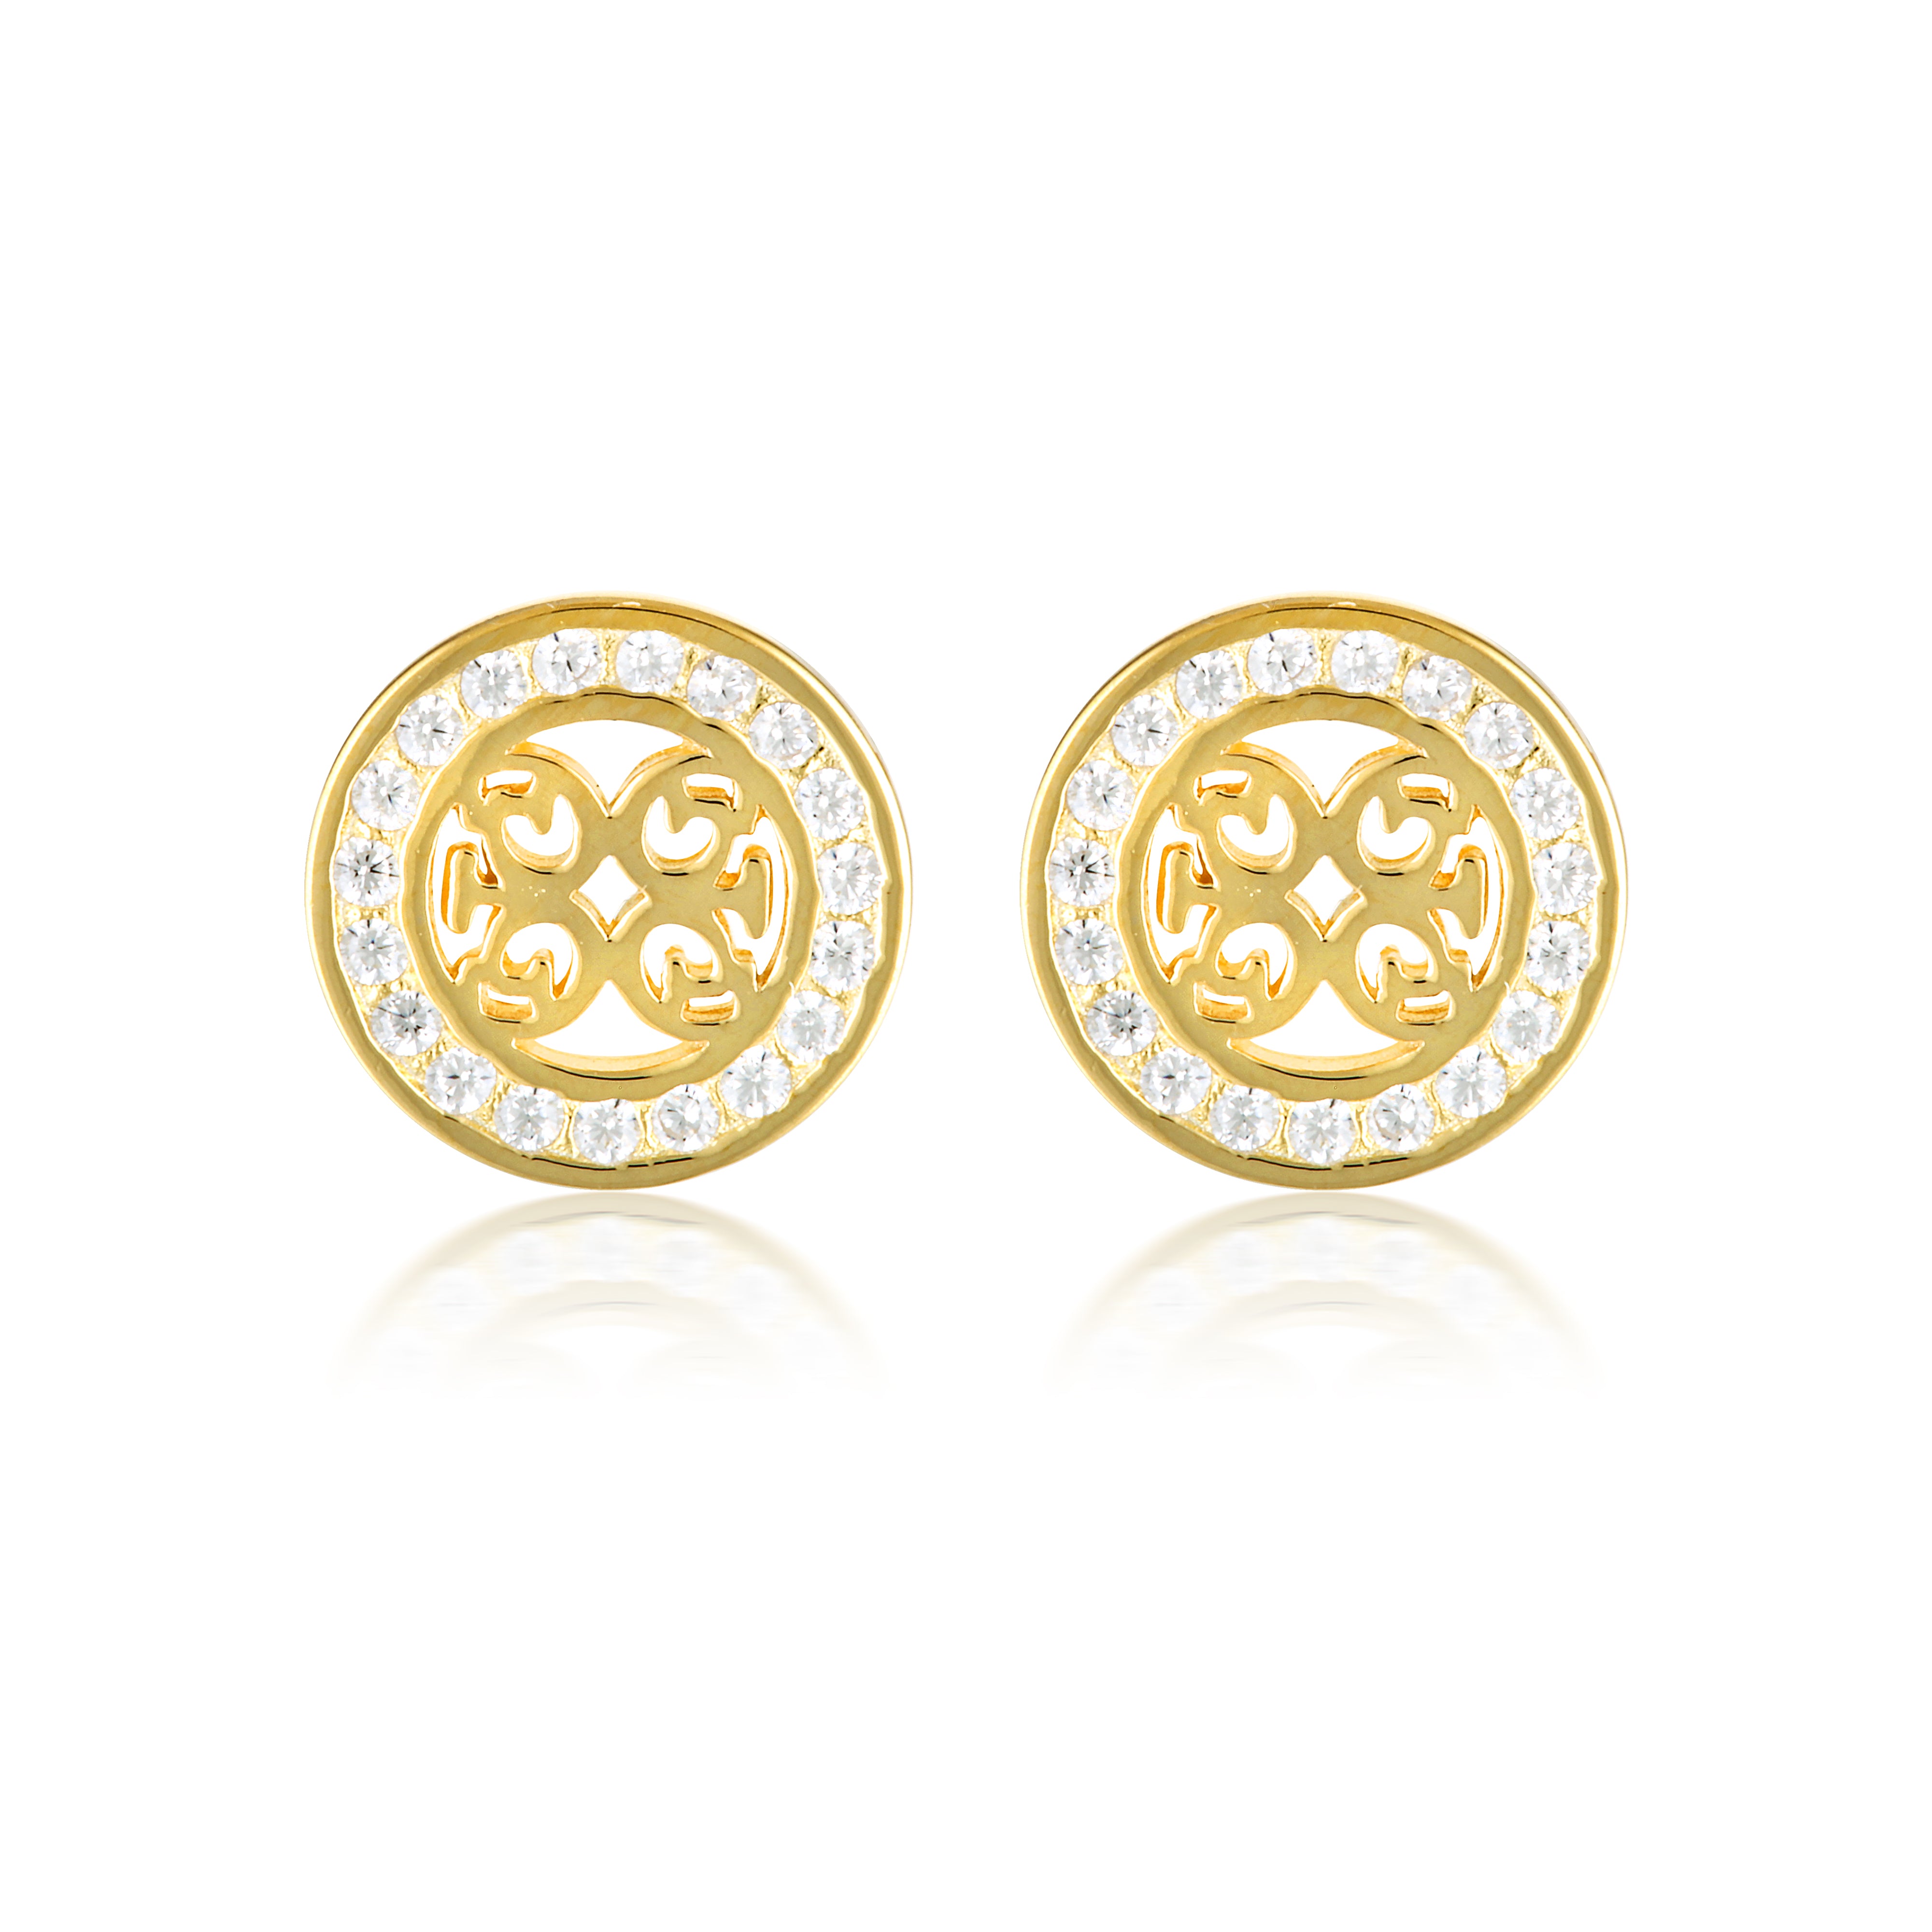 SIGNATURE MEDALION EARRINGS GOLD